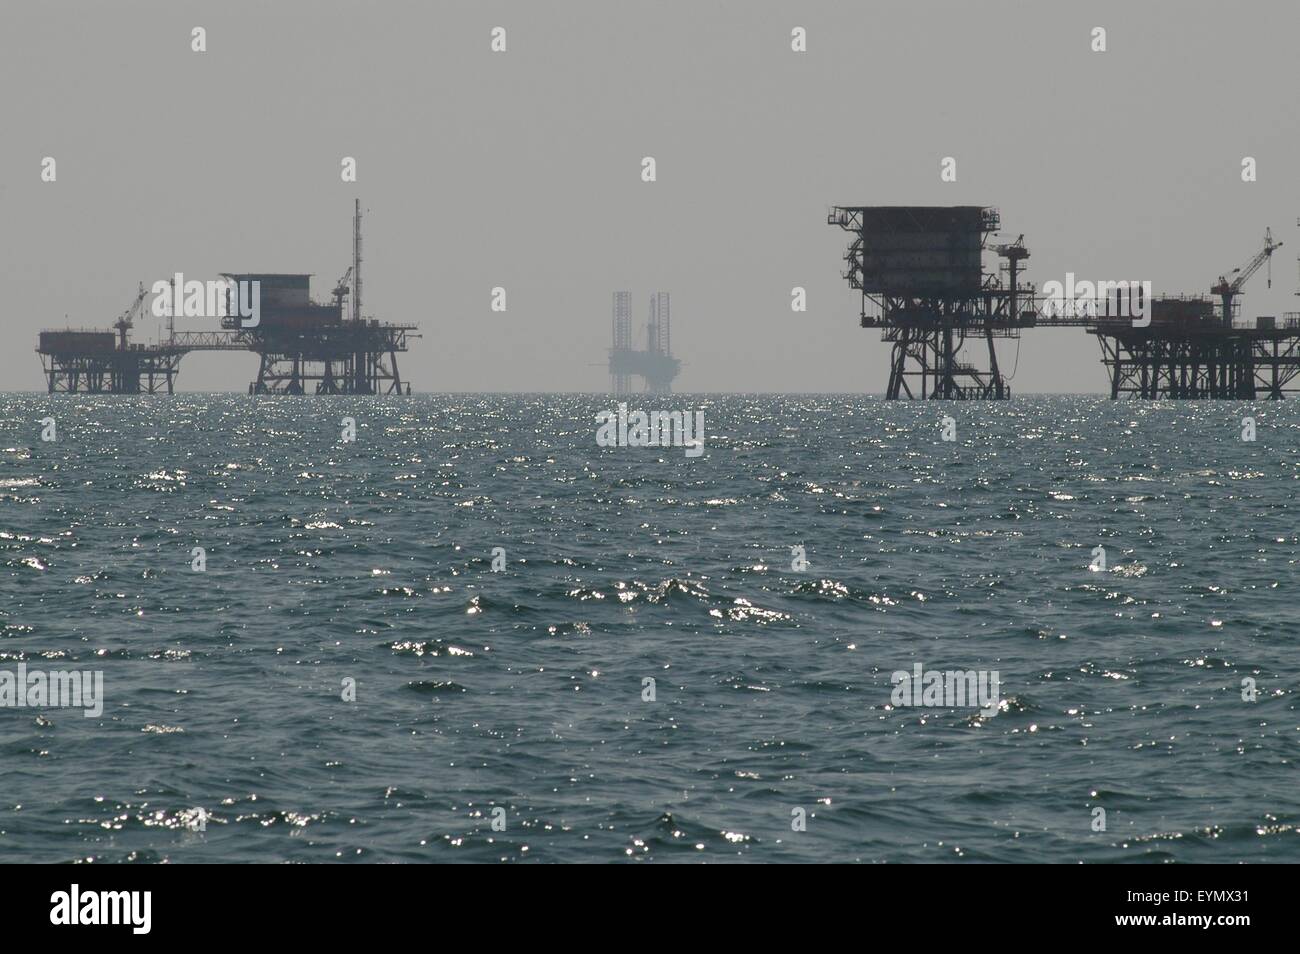 platforms for the extraction of oil and natural gas in Adriatic sea  offshore Ravenna (Italy) Stock Photo